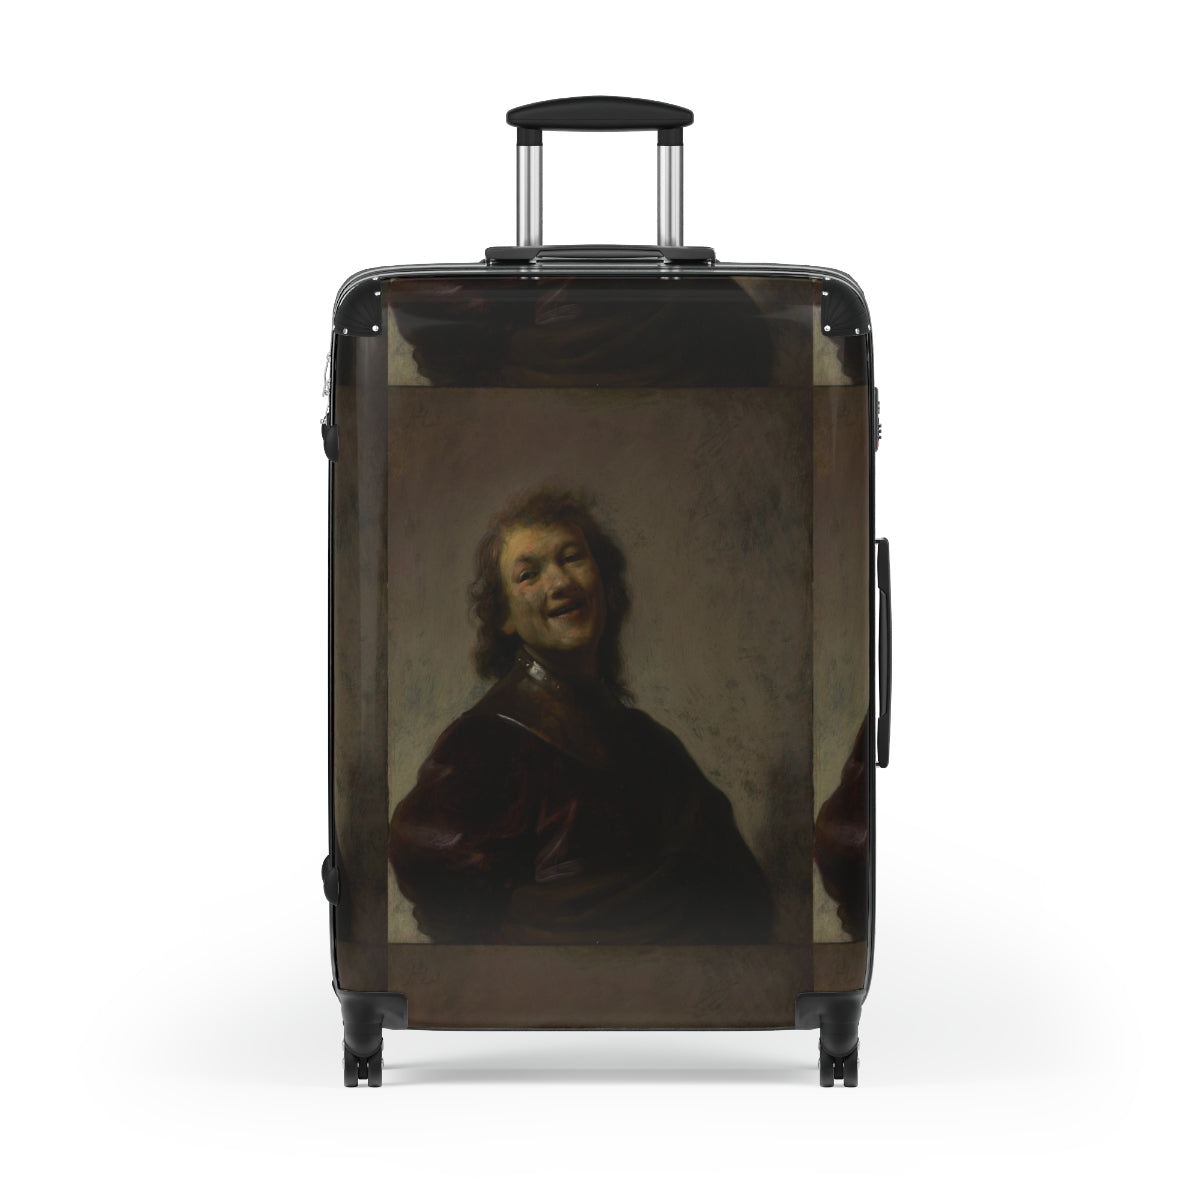 Getrott Rembrandt Laughing by Rembrandt Black Cabin Suitcase Extended Storage Adjustable Telescopic Handle Double wheeled Polycarbonate Hard-shell Built-in Lock-Bags-Geotrott